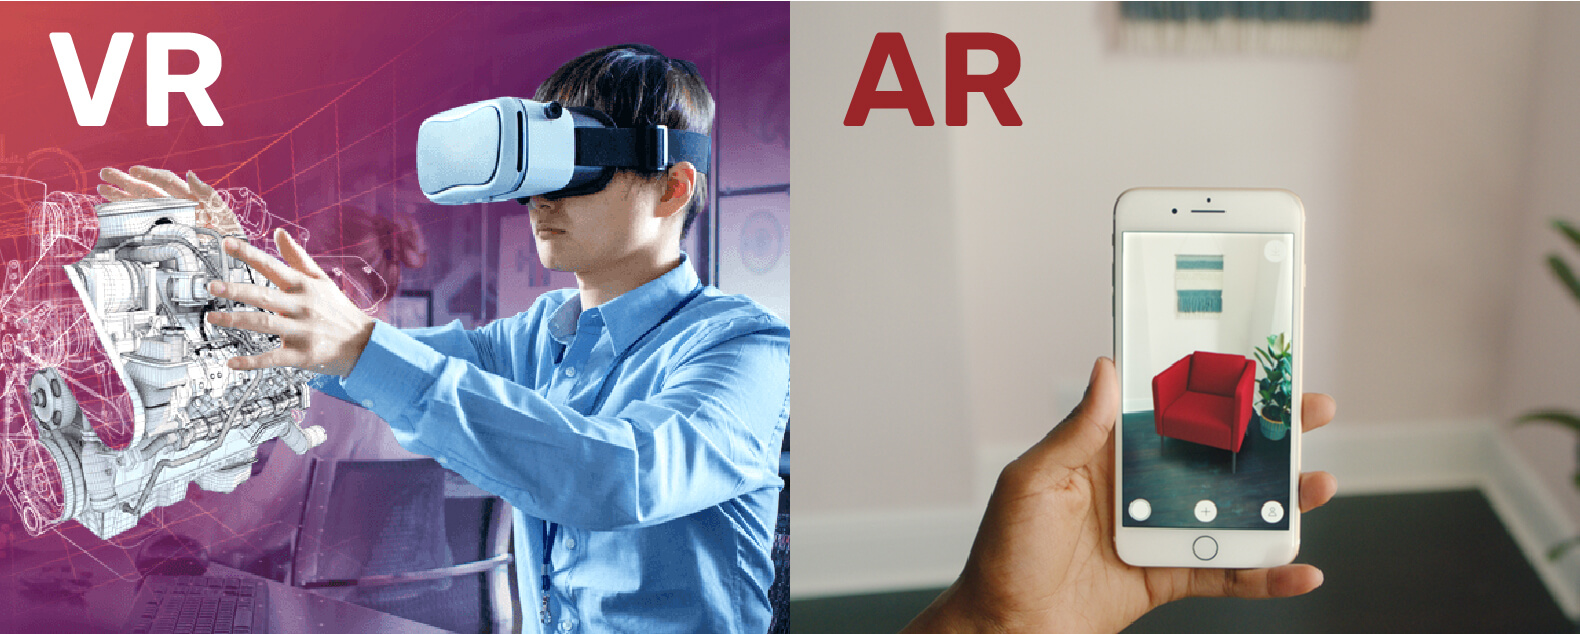 Experiences of AR VR